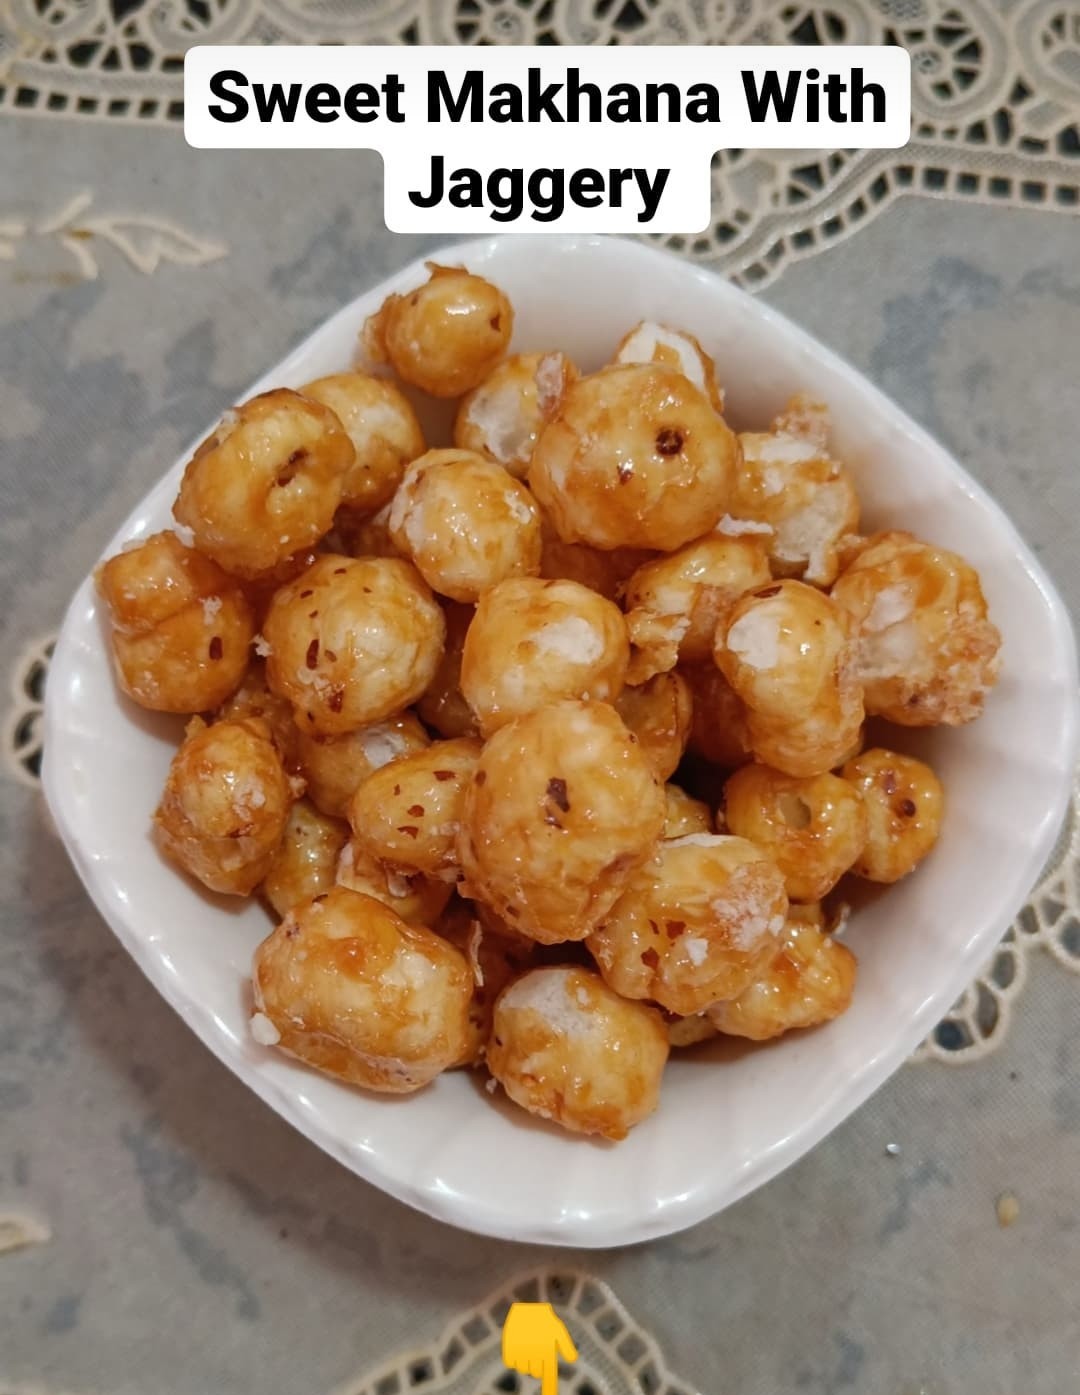 jaggery, a sugar substitute used in Makhana snack